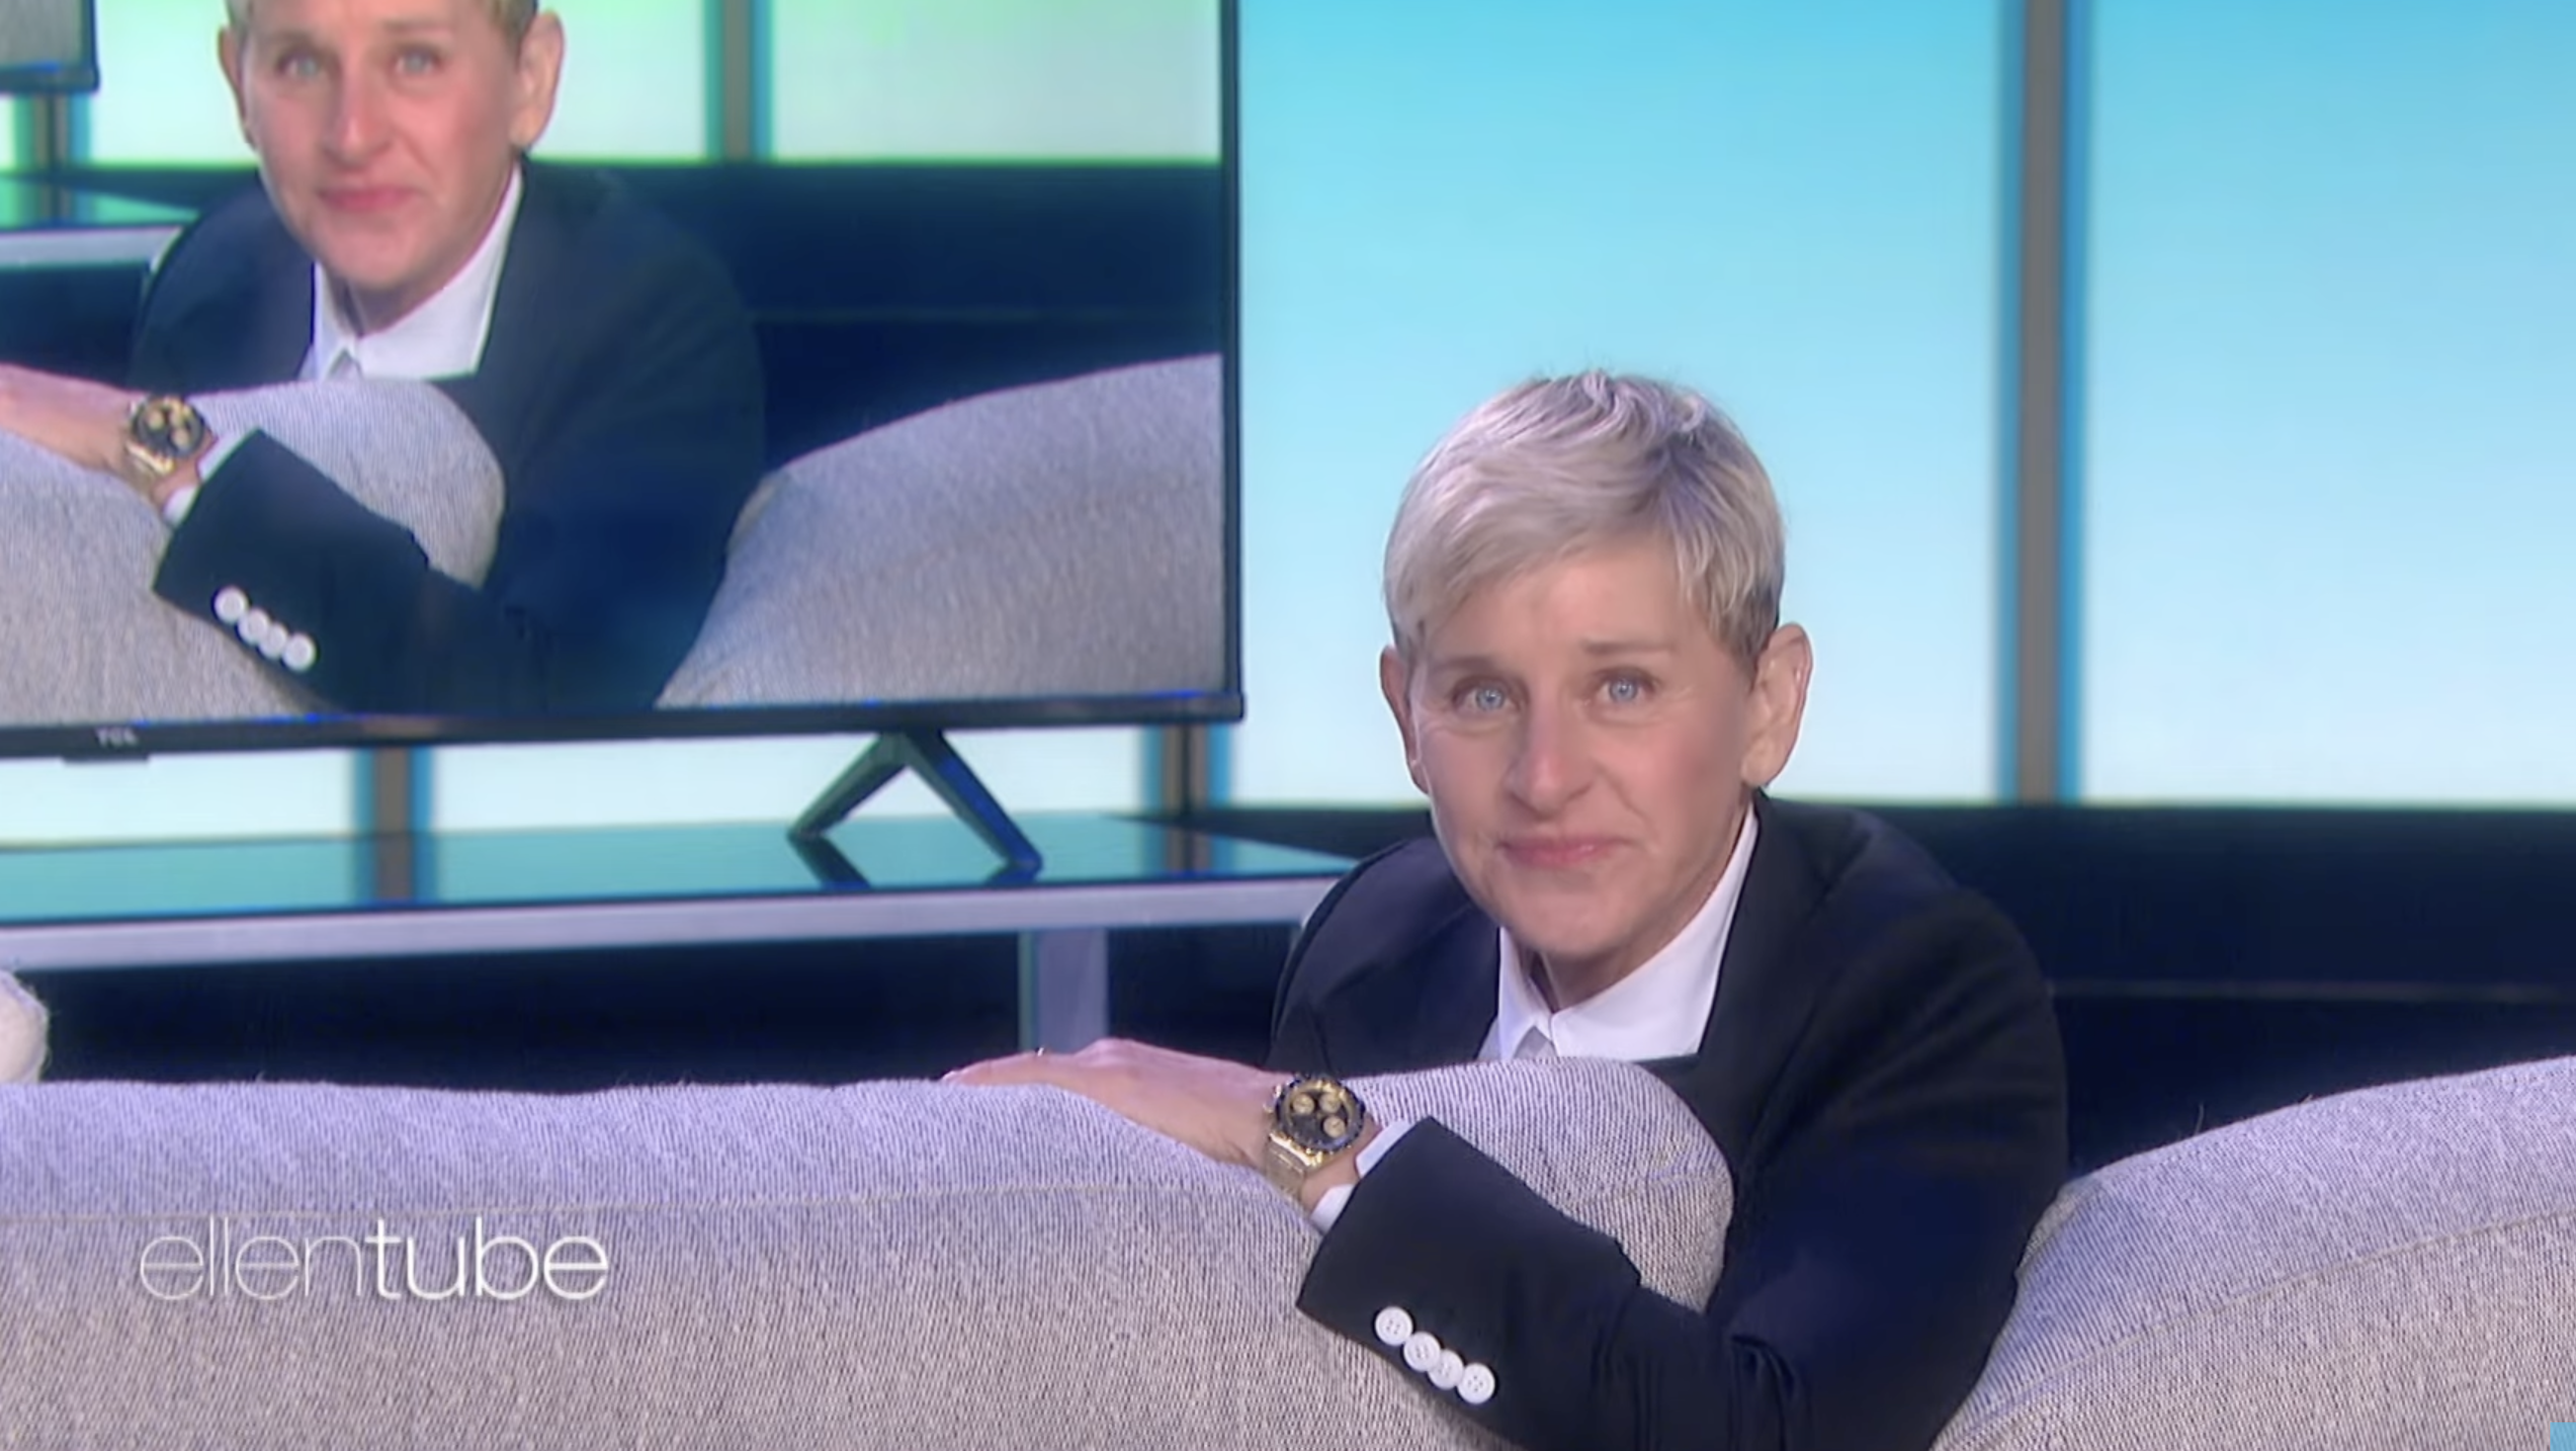 Ellen DeGeneres says goodbye to her eponymous talk show after 19 years